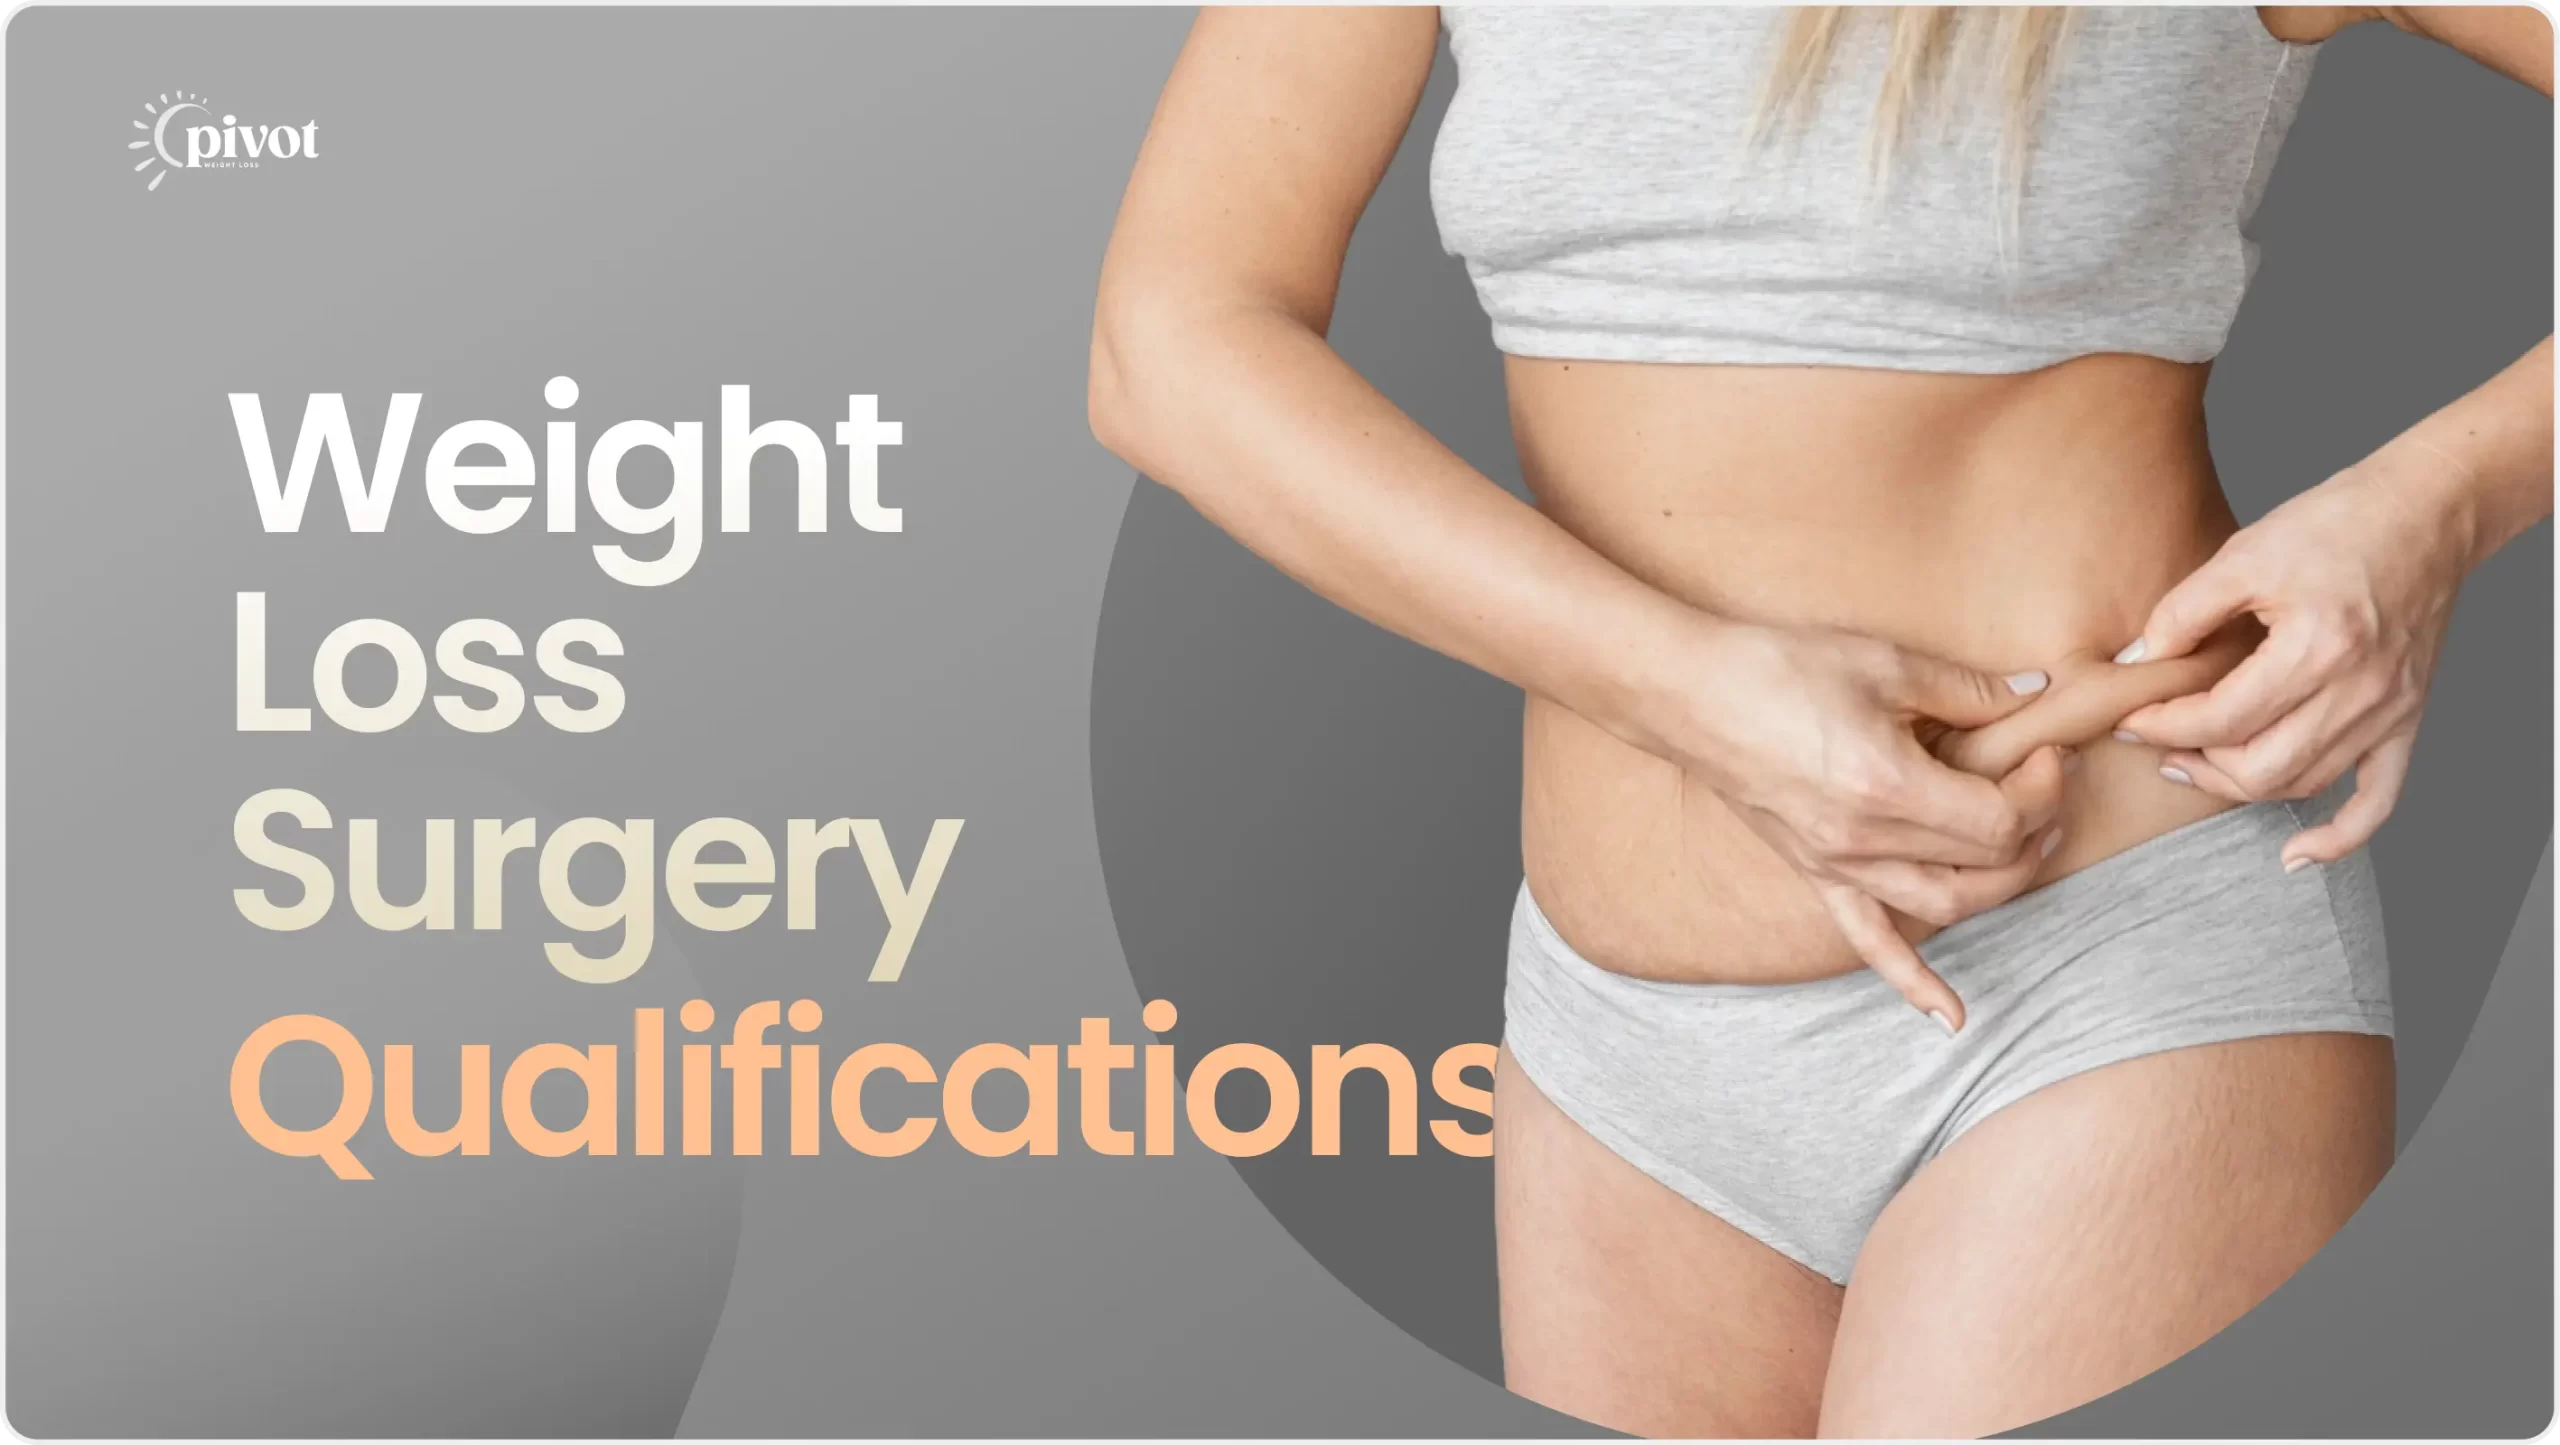 Weight Loss Surgery Qualifications and Requirements